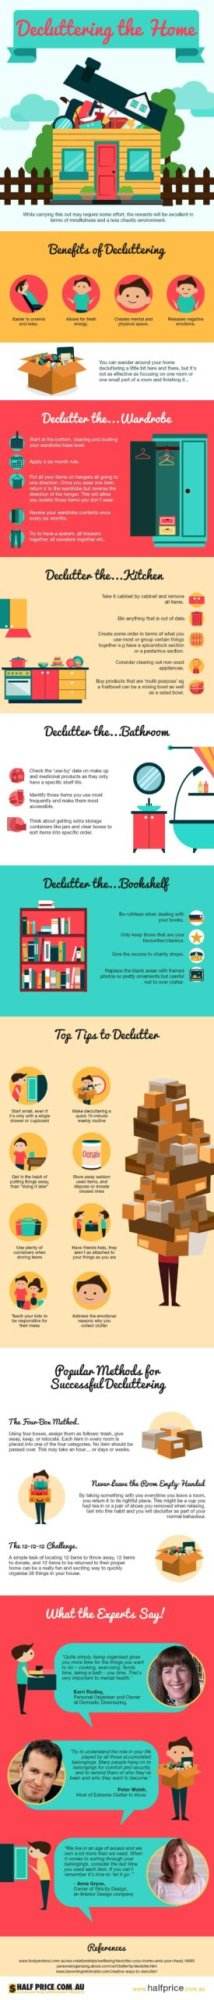 28 Awesome Tips on How To Declutter your Home (Infographic)